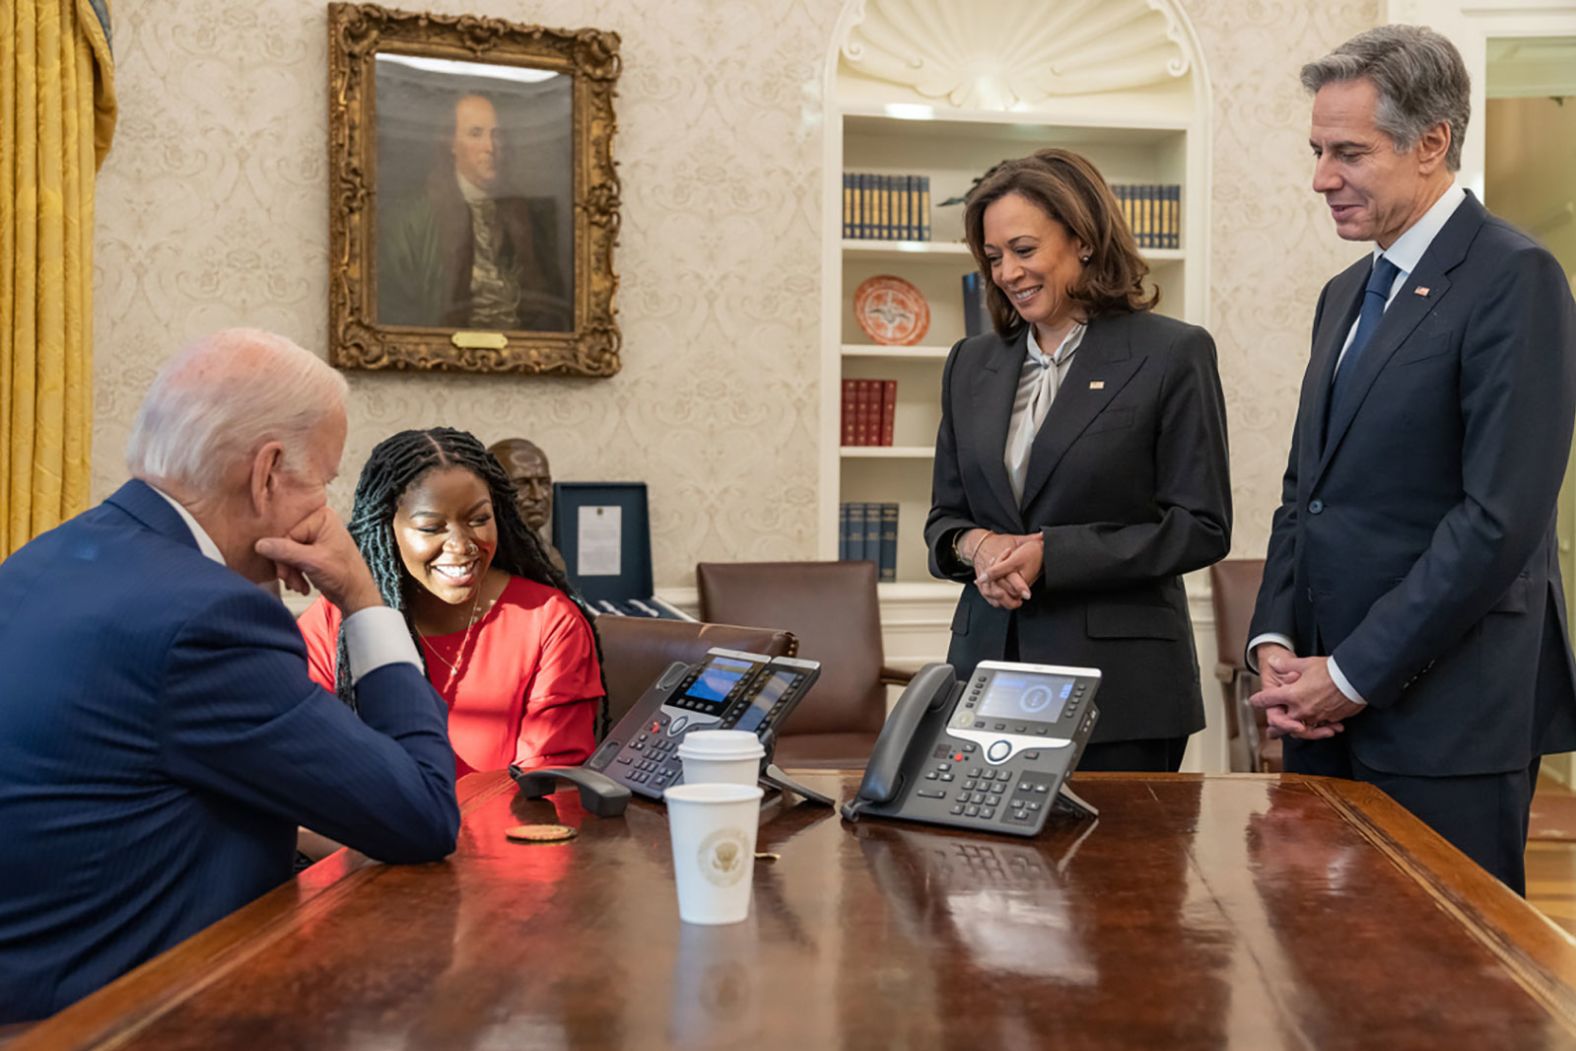 Griner's wife, Cherelle, sits with President Joe Biden as they talk with Griner on the phone after her release in December 2022. This photo was tweeted on the president's account, saying about Griner: "She is safe. She is on a plane. She is on her way home." On the right are Vice President Kamala Harris and Secretary of State Antony Blinken.